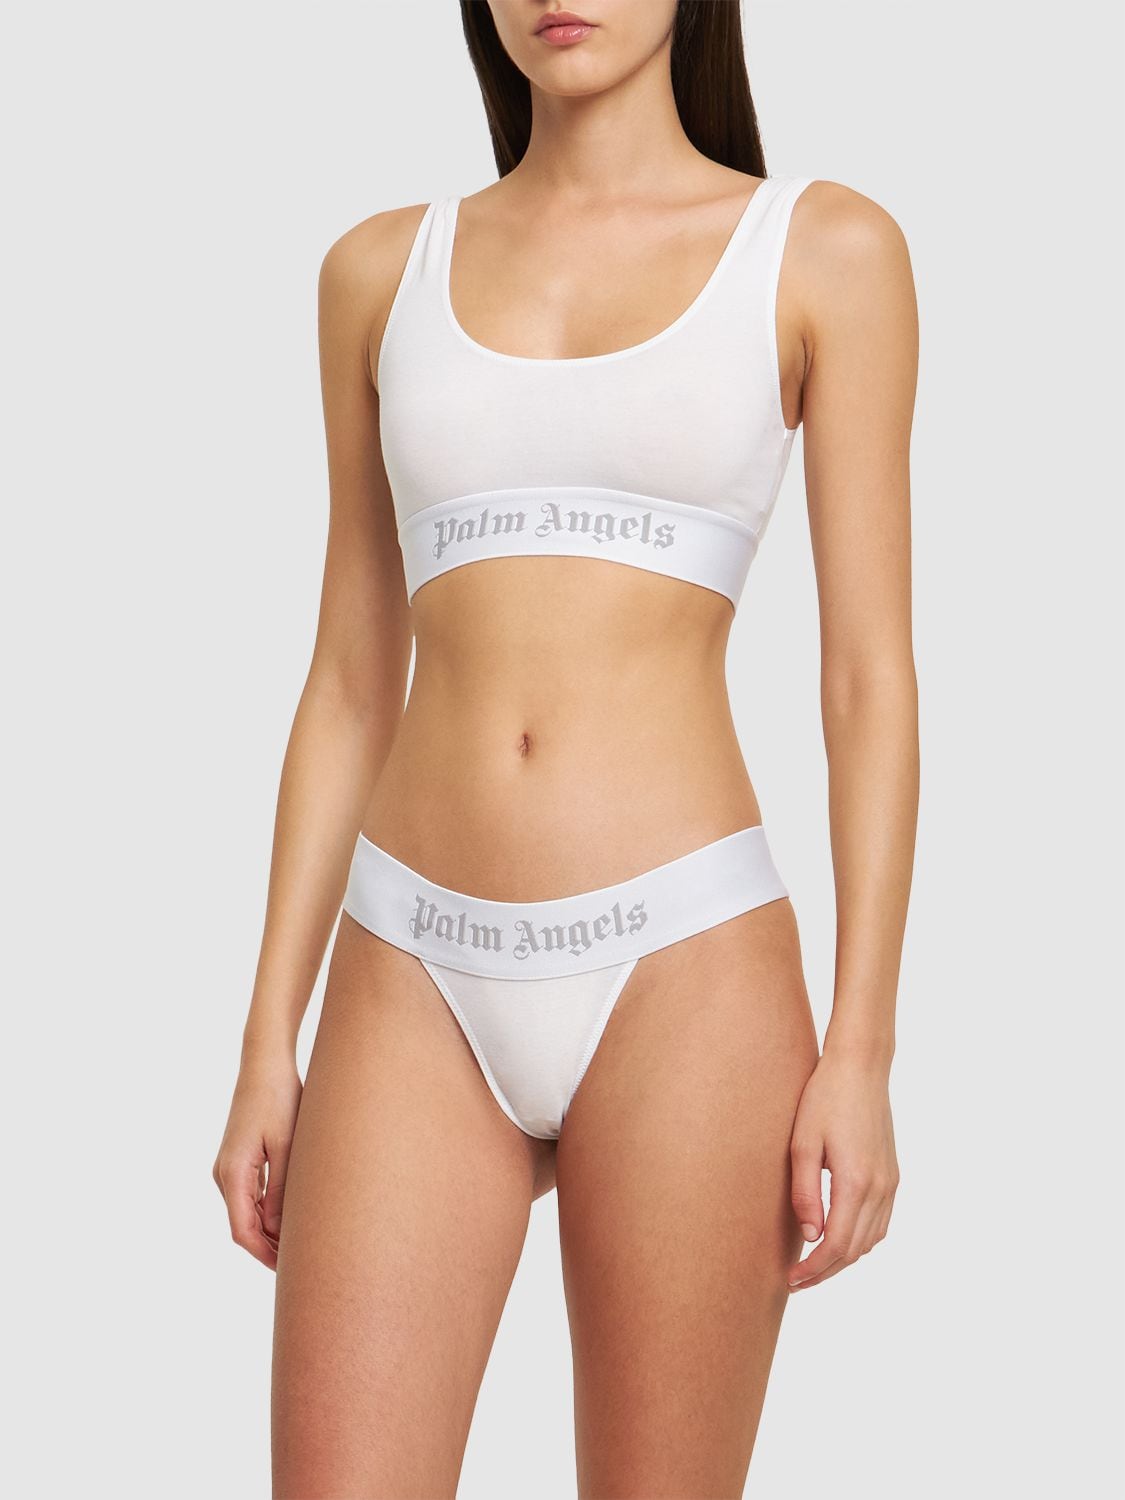 Lingerie Palm Angels for Women